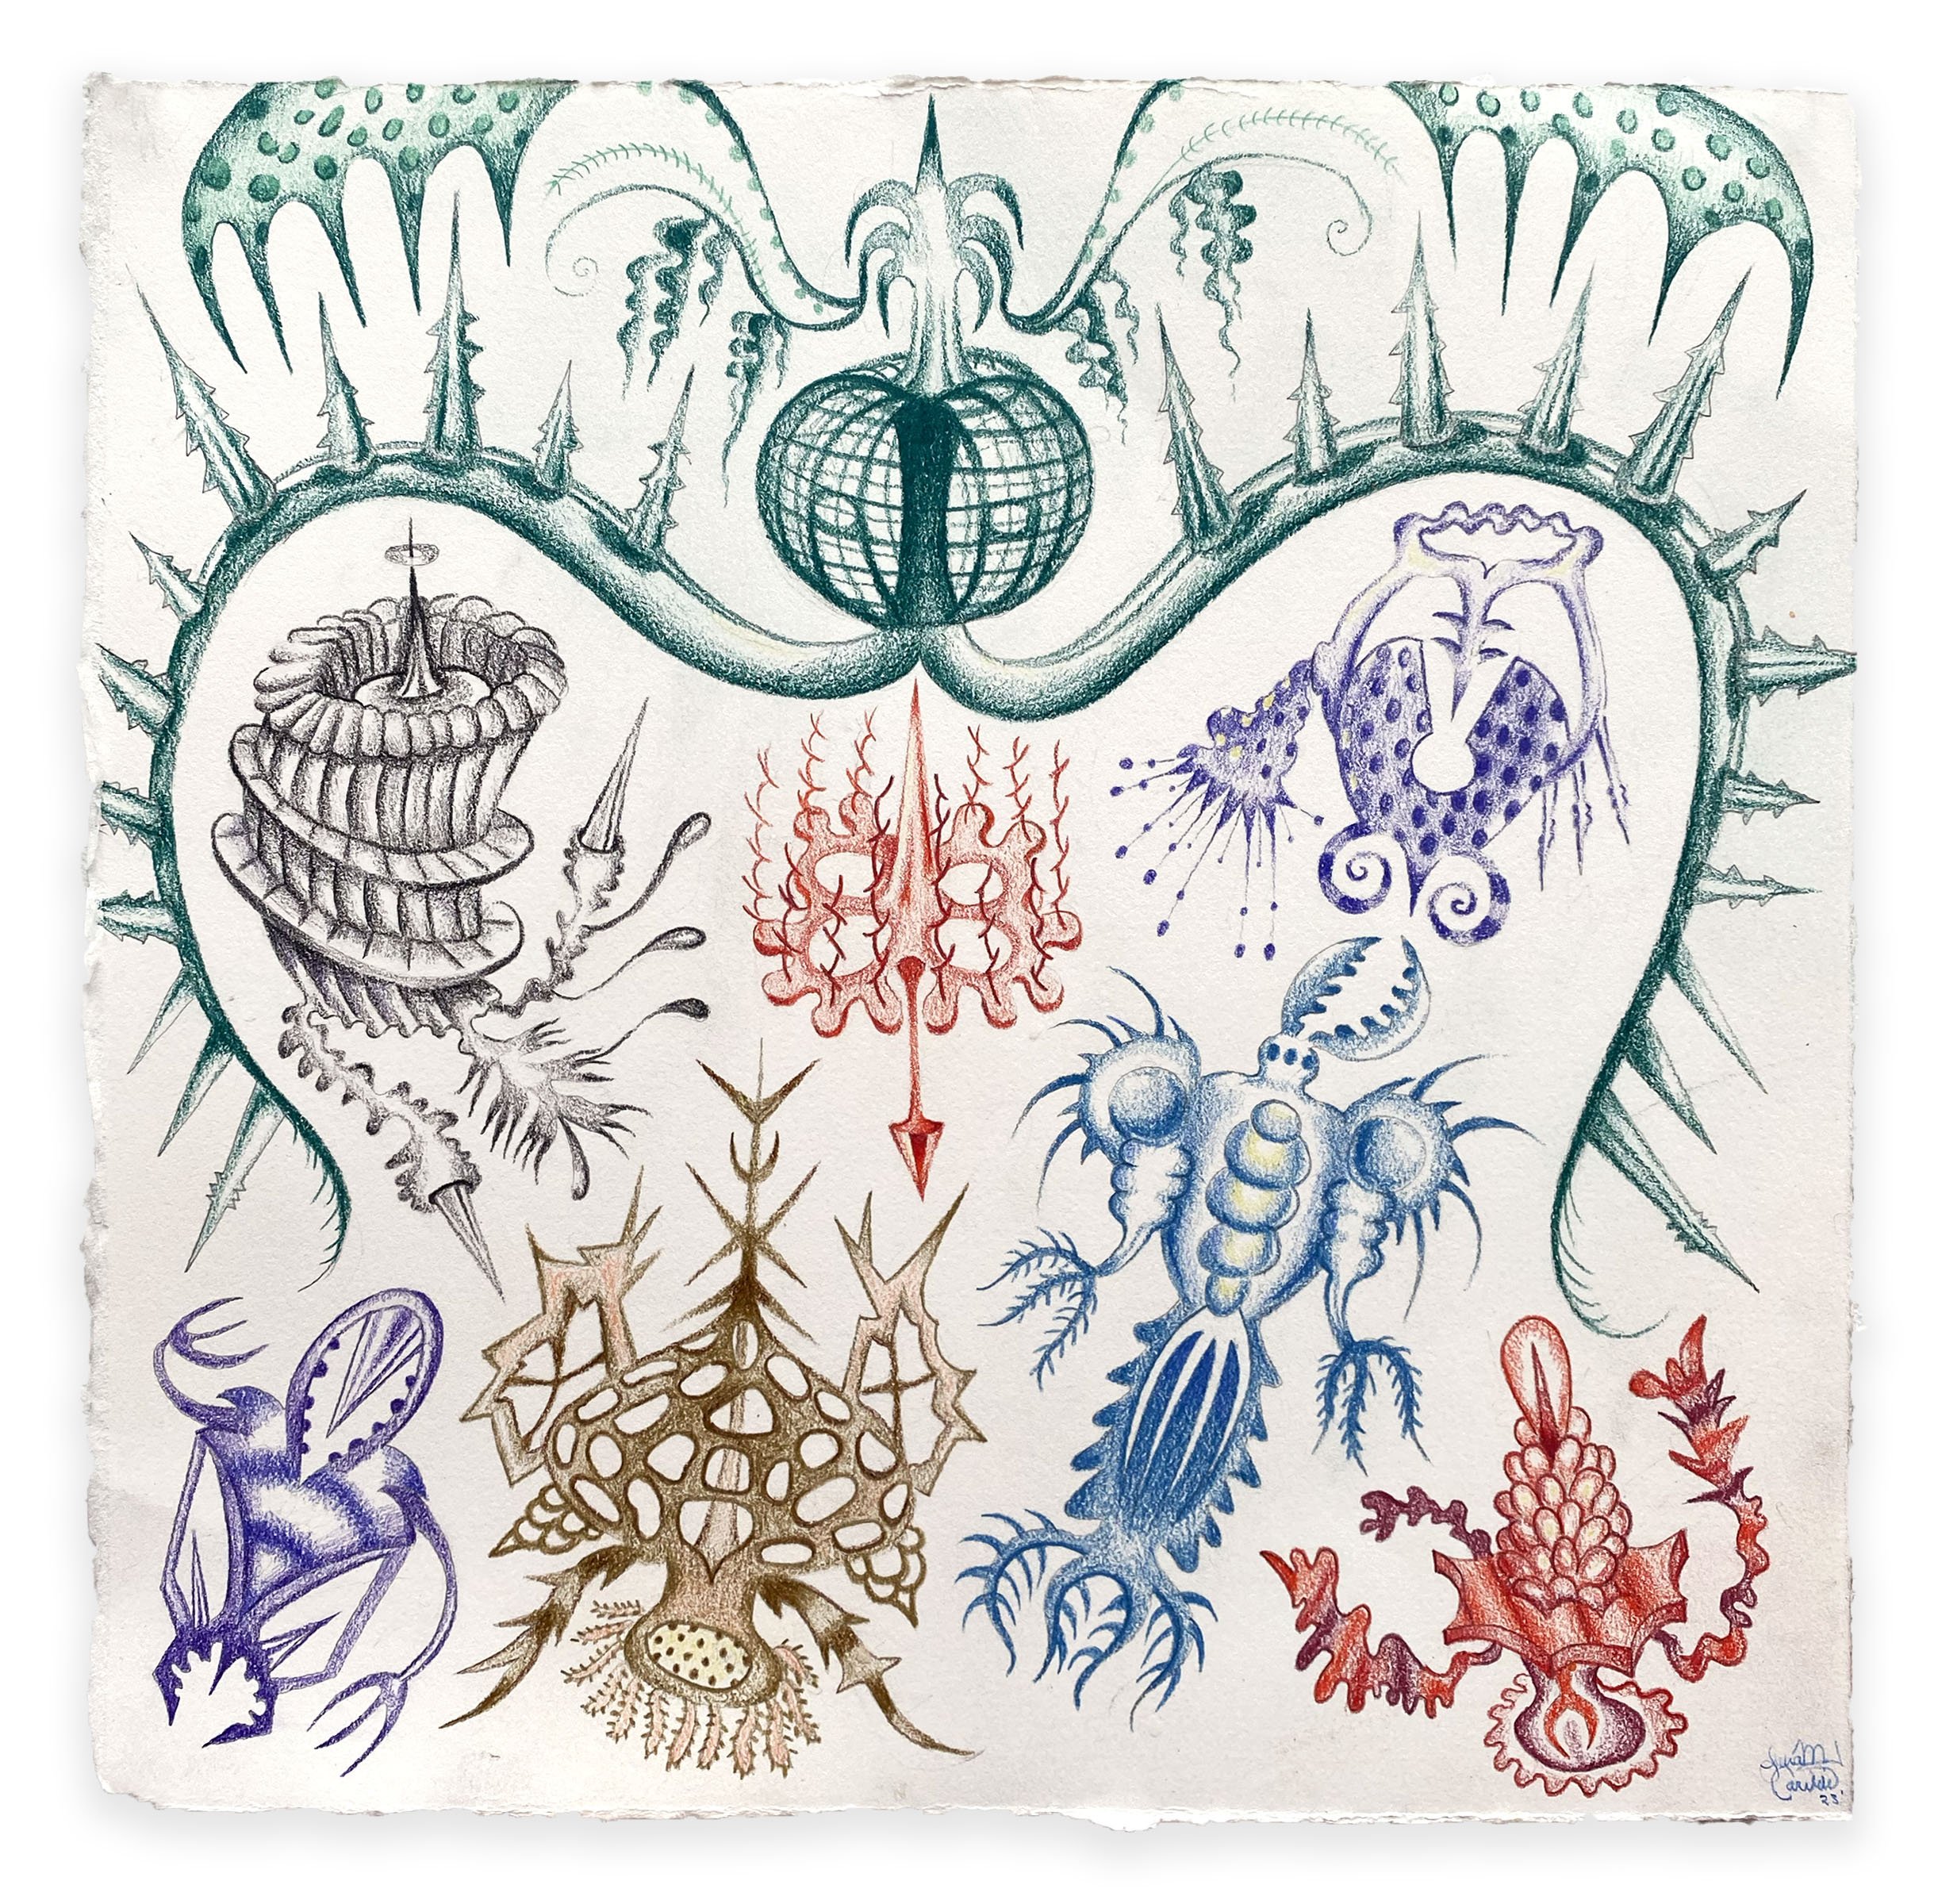 Ernst Haeckel Study, color pencil on paper, 12 x 12 in. 2022